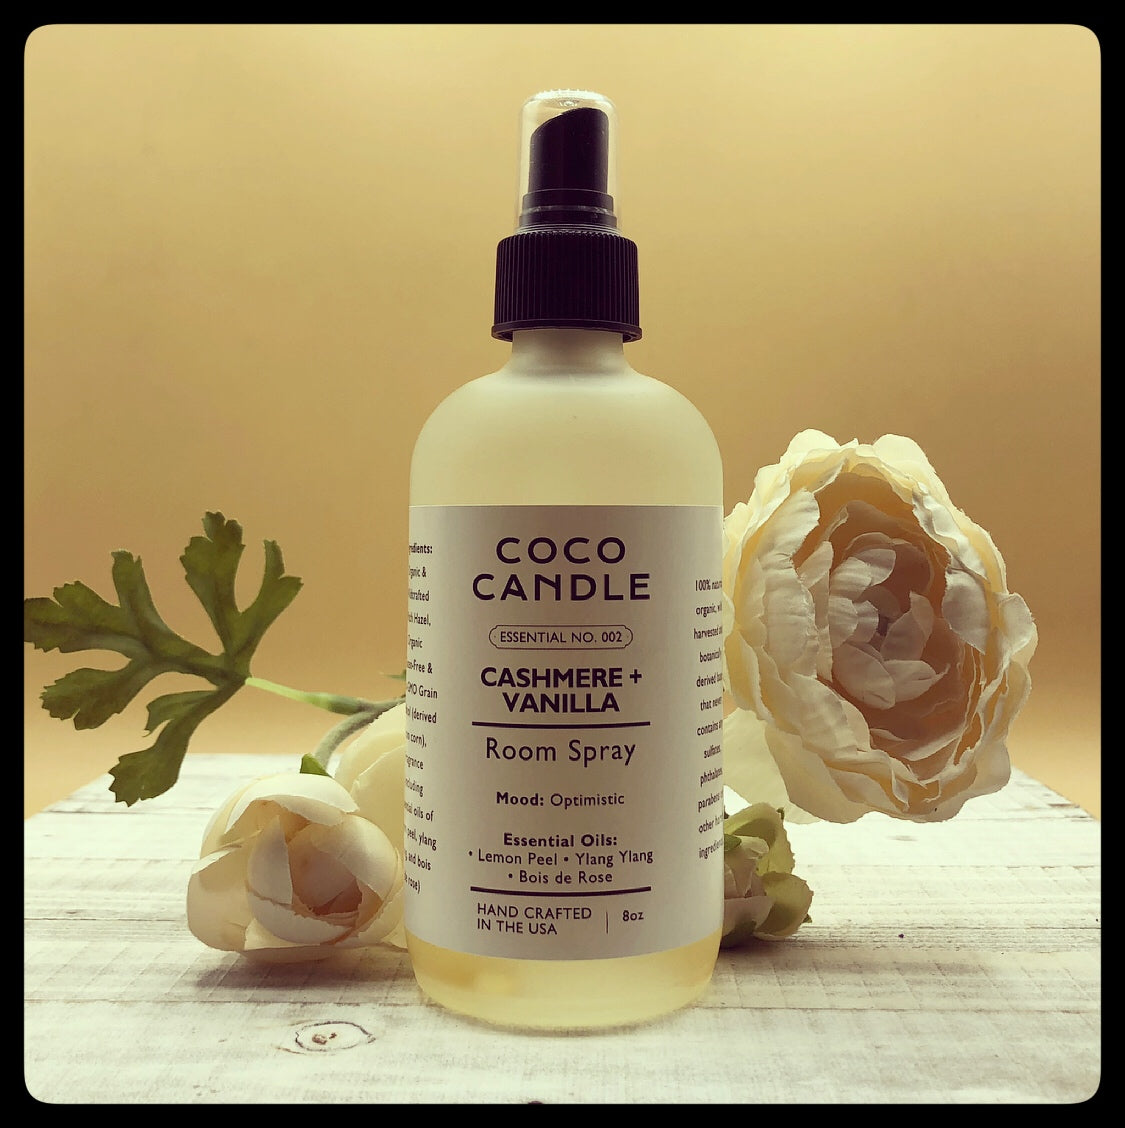 Sage + Lavender:  Our room sprays are the perfect addition to your Coco Candle collection.  They are handcrafted with a 100% natural, organic, wild harvested and botanically derived base that never contains any sulfates, phthalates, Parabens or other harsh ingredients.  Just shake and spray to use!